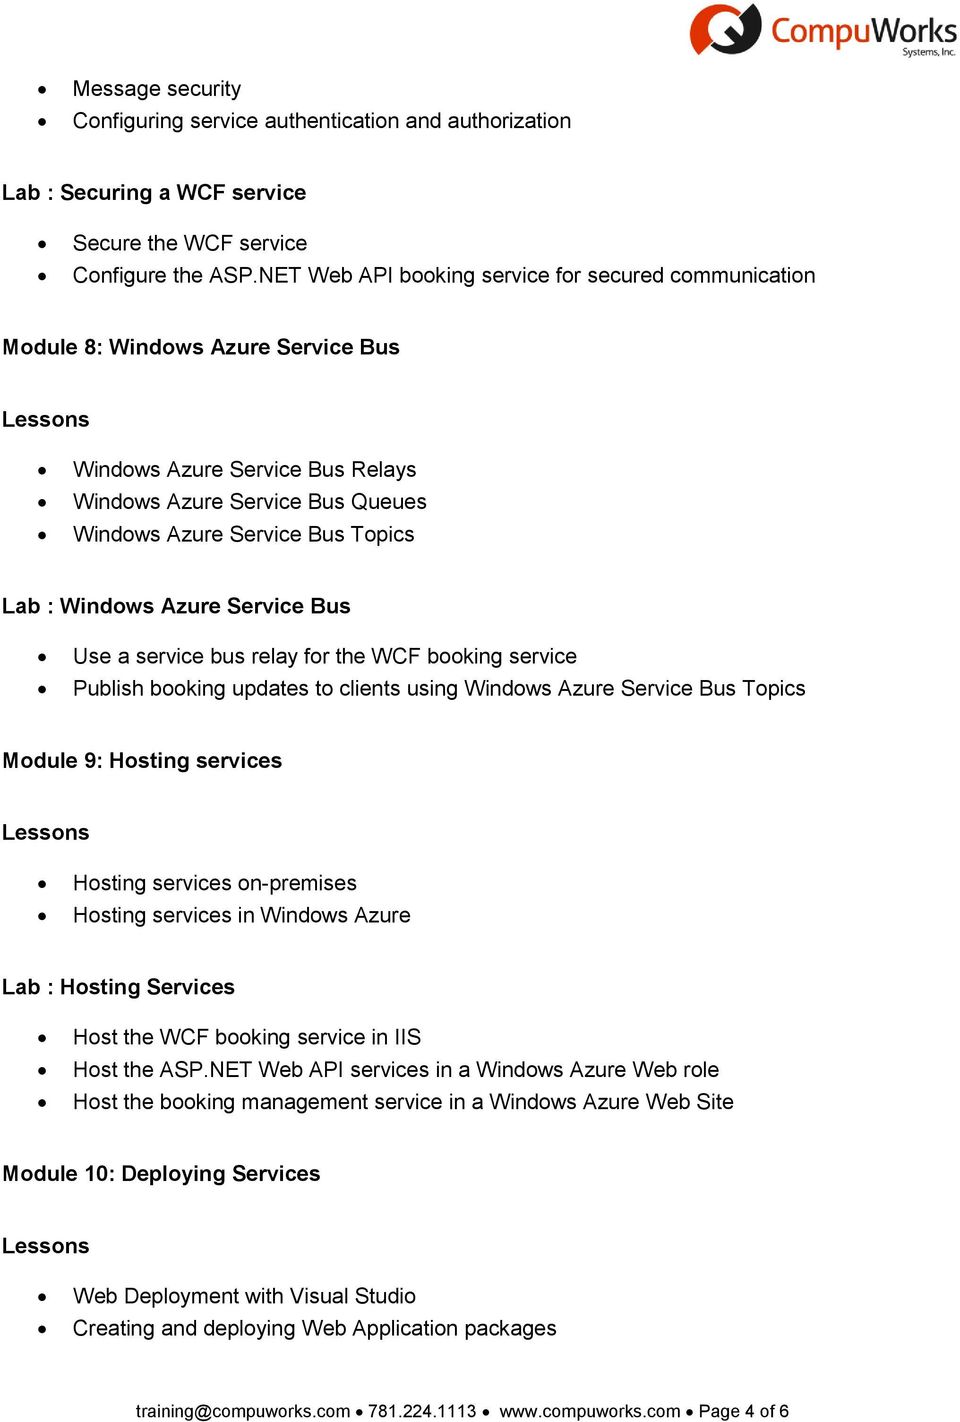 Windows Azure Service Bus Use a service bus relay for the WCF booking service Publish booking updates to clients using Windows Azure Service Bus Topics Module 9: Hosting services Hosting services